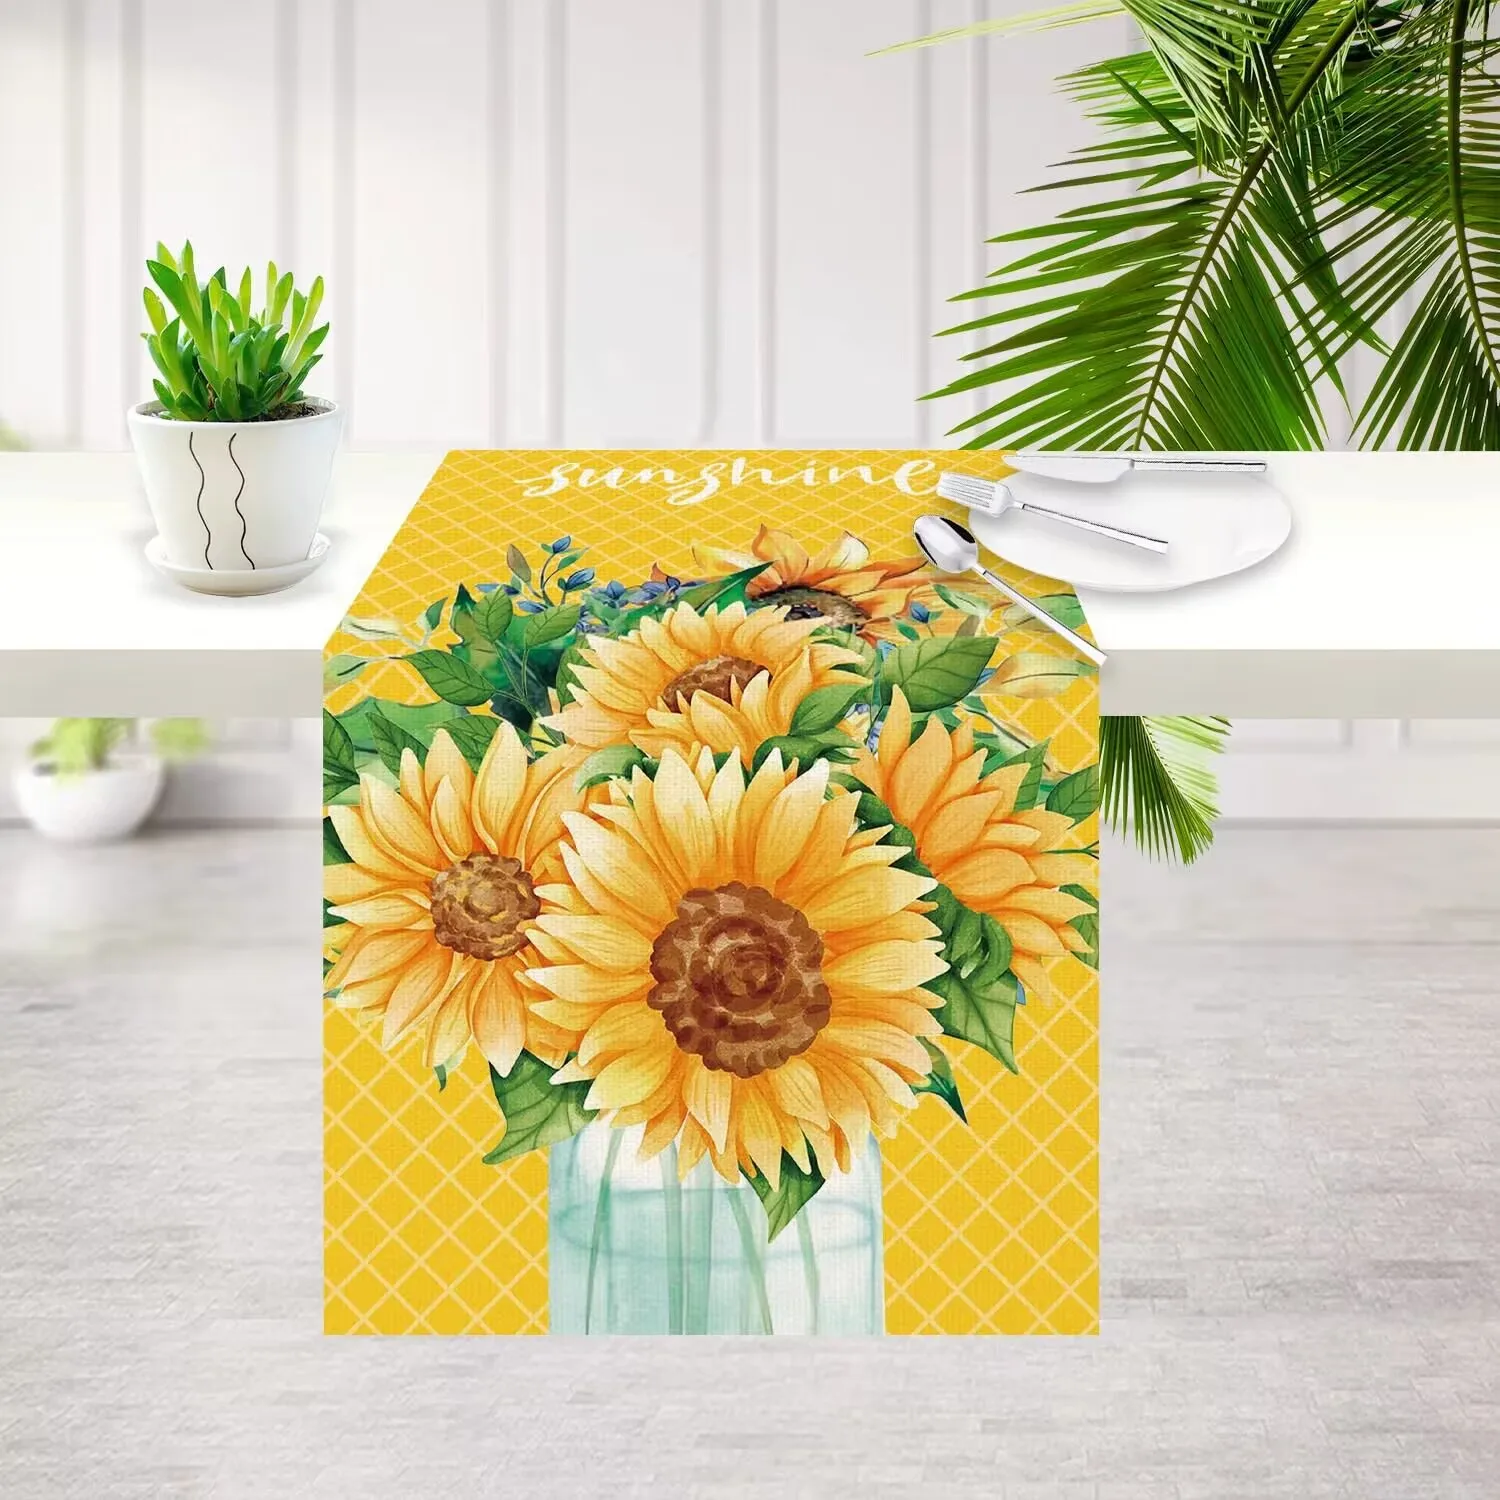 

Summer Sunflower Table Runner Cloth Watercolor Floral 12x72 Inch Seasonal Holiday Kitchen Dining Coffee Table Decoration burlap